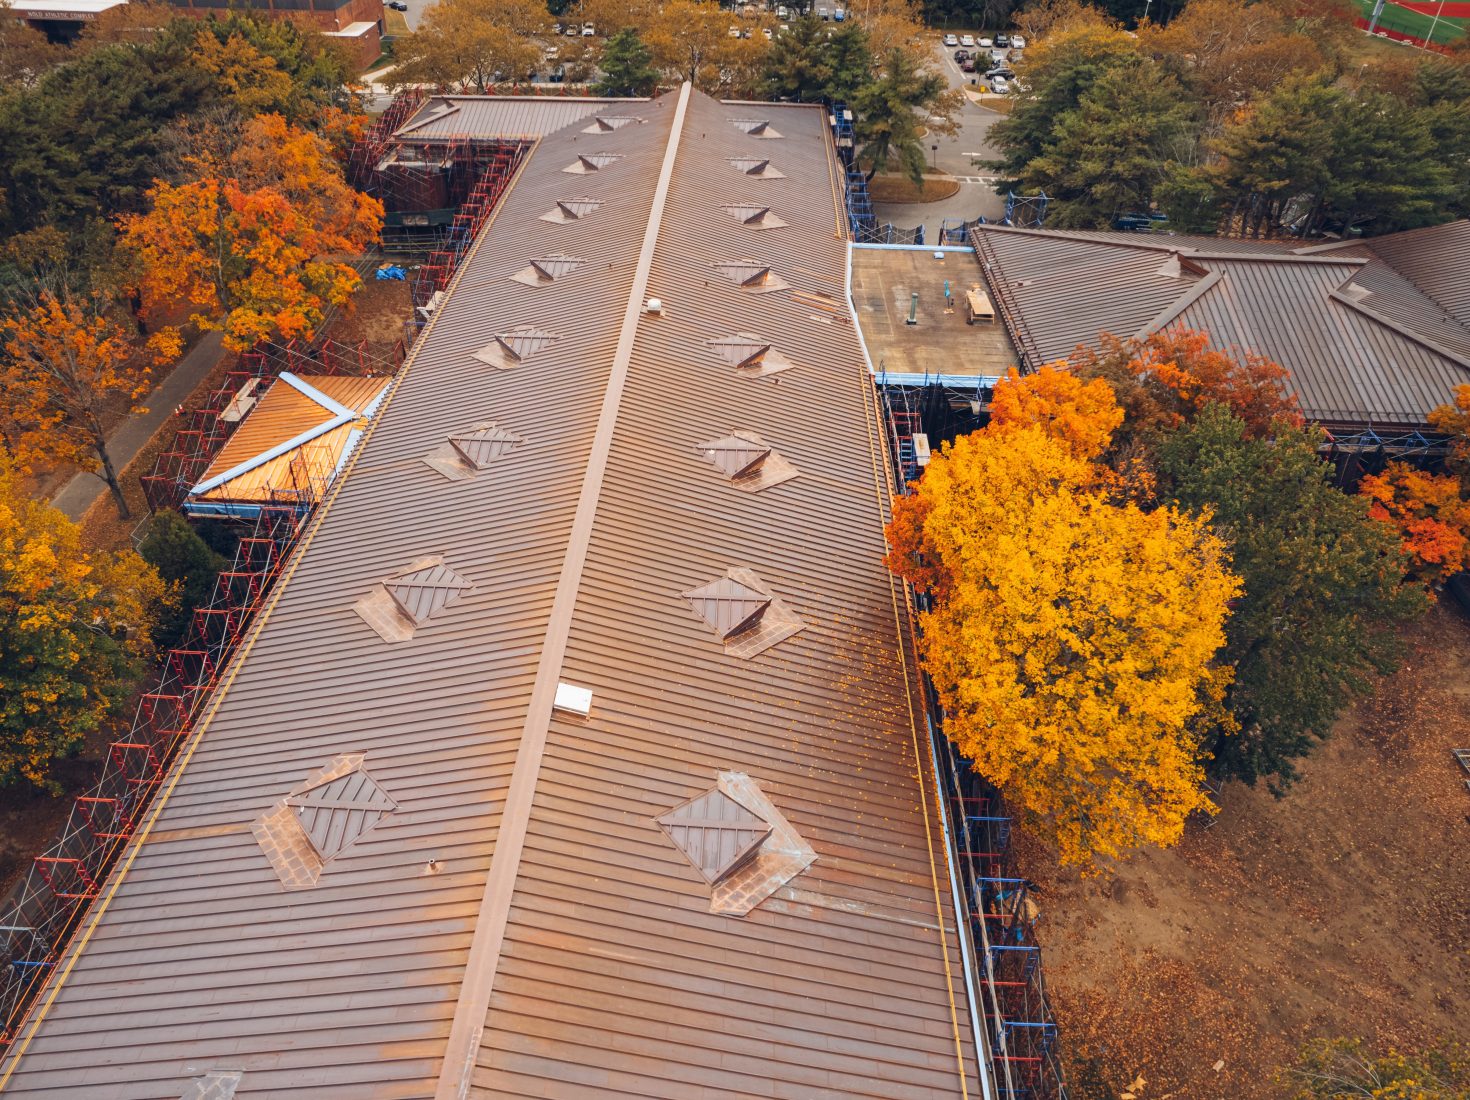 At the historic Lupton Hall, all roofing and canopy assemblies were replaced down to the structural deck